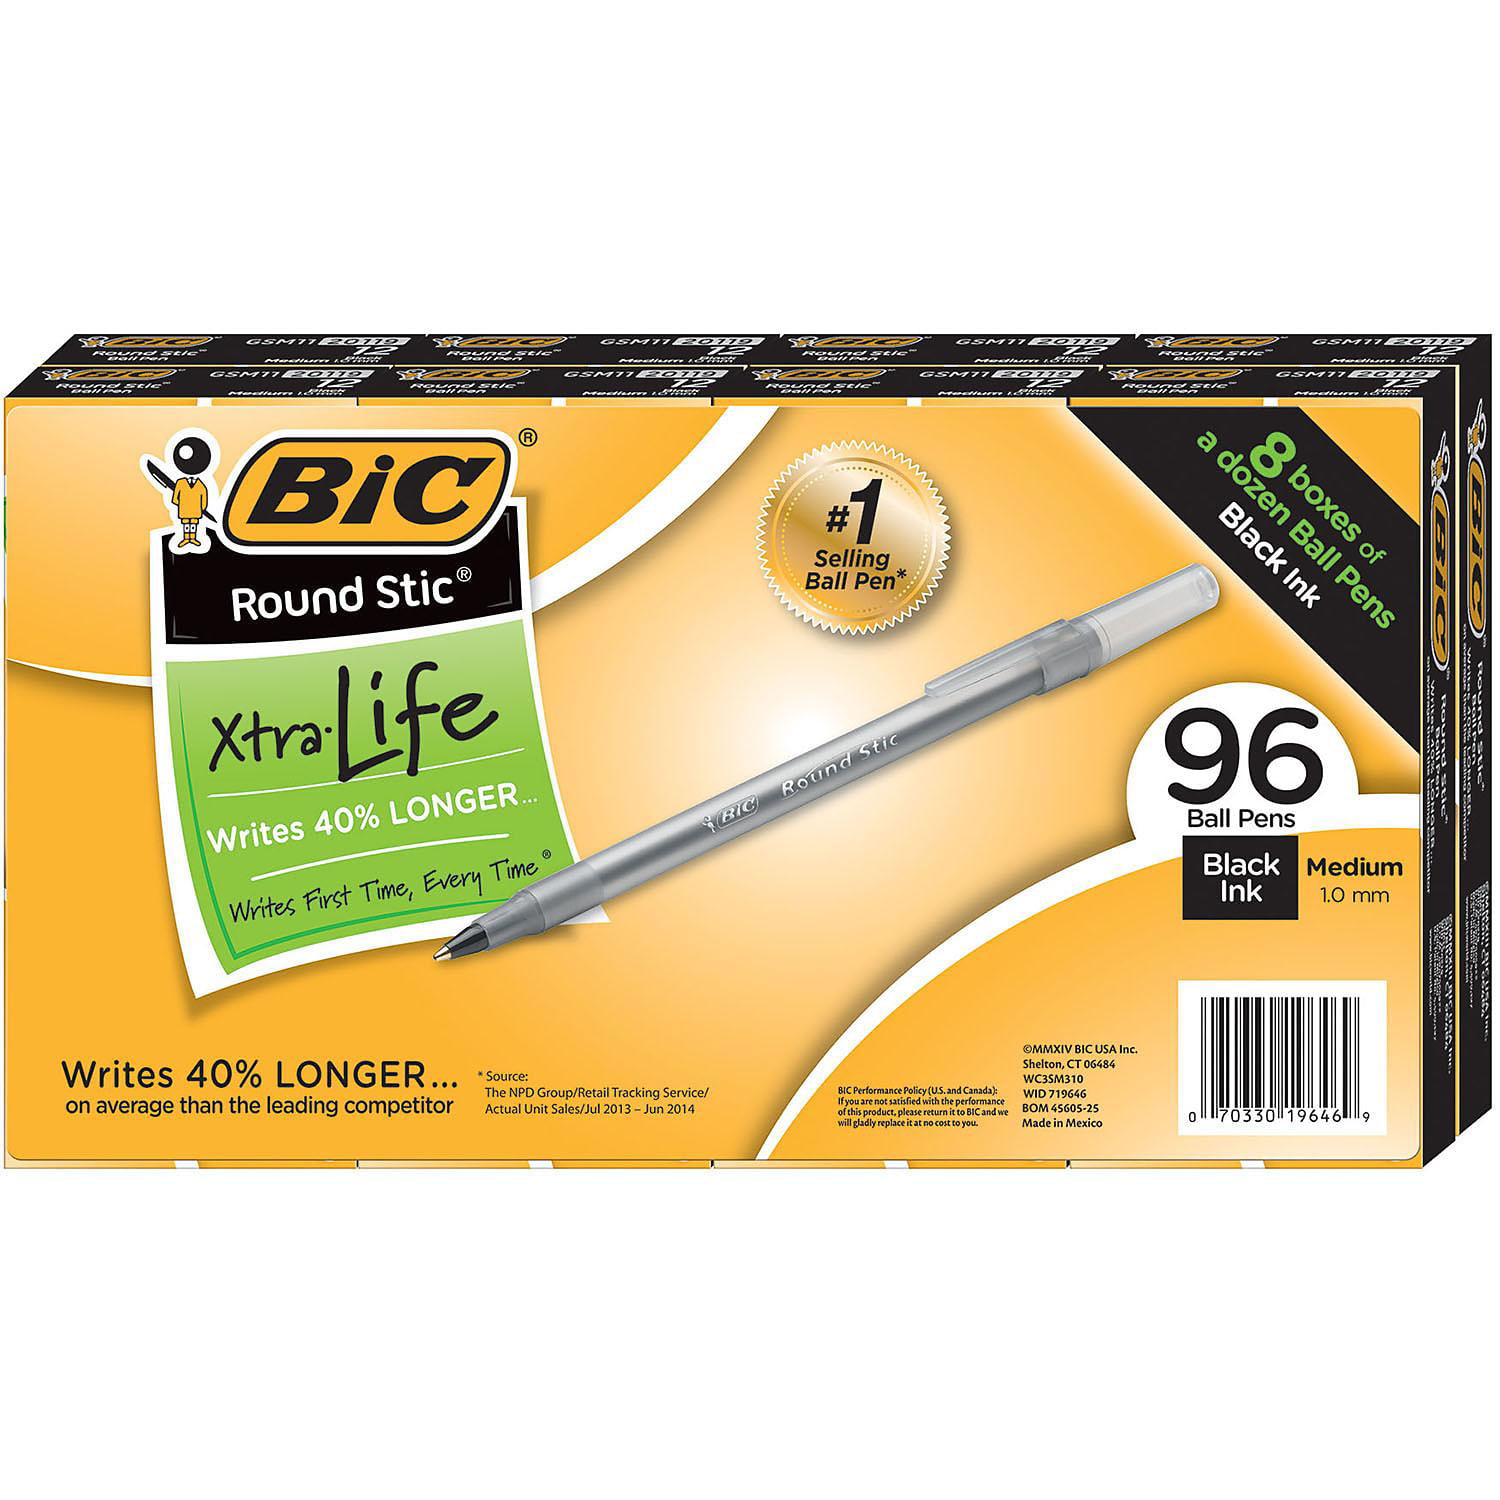 BiC Round Stic Xtra Life Medium-Point Ball Pens Black 12 24 36 96 or 144 Count